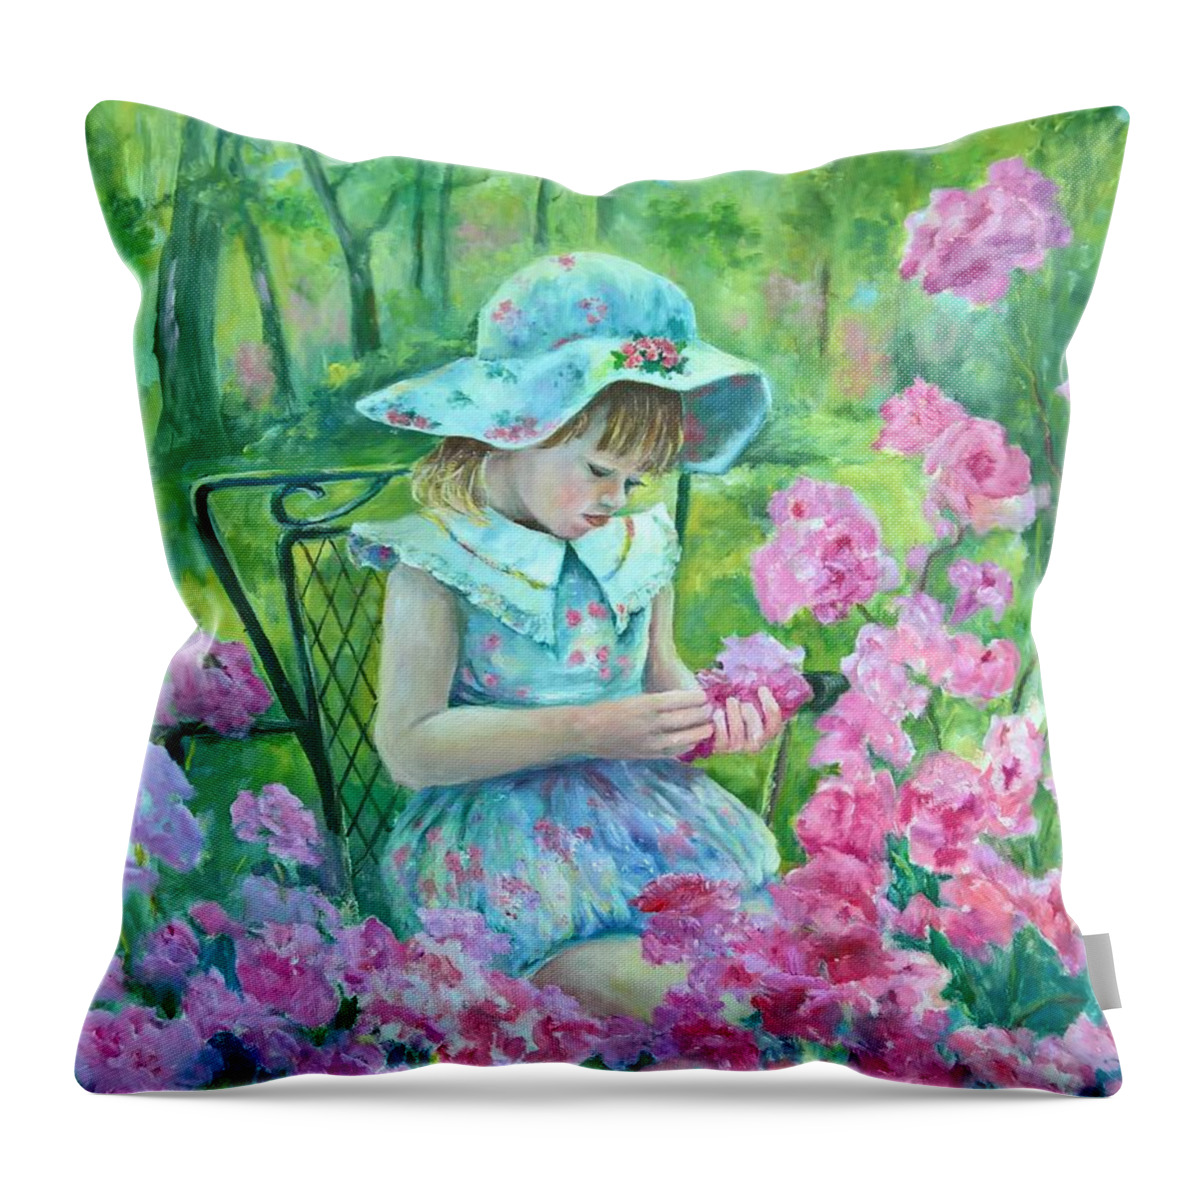 Children Throw Pillow featuring the painting Nicole by ML McCormick